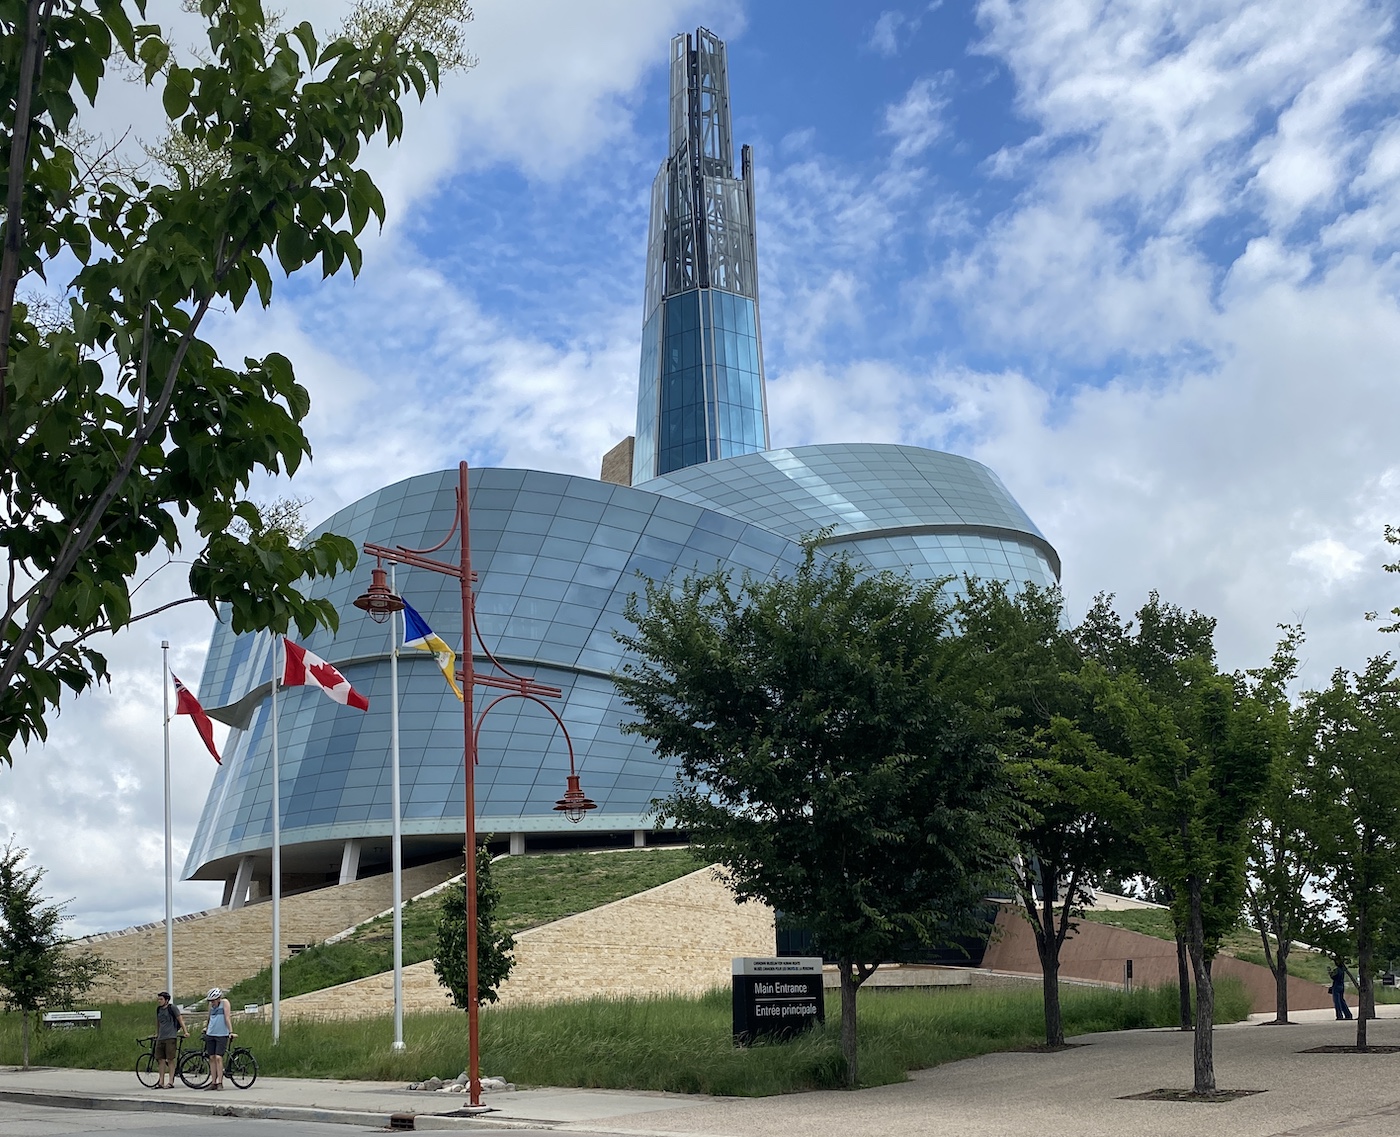 Human rights museum in Winnipeg Manitoba with trees in summer